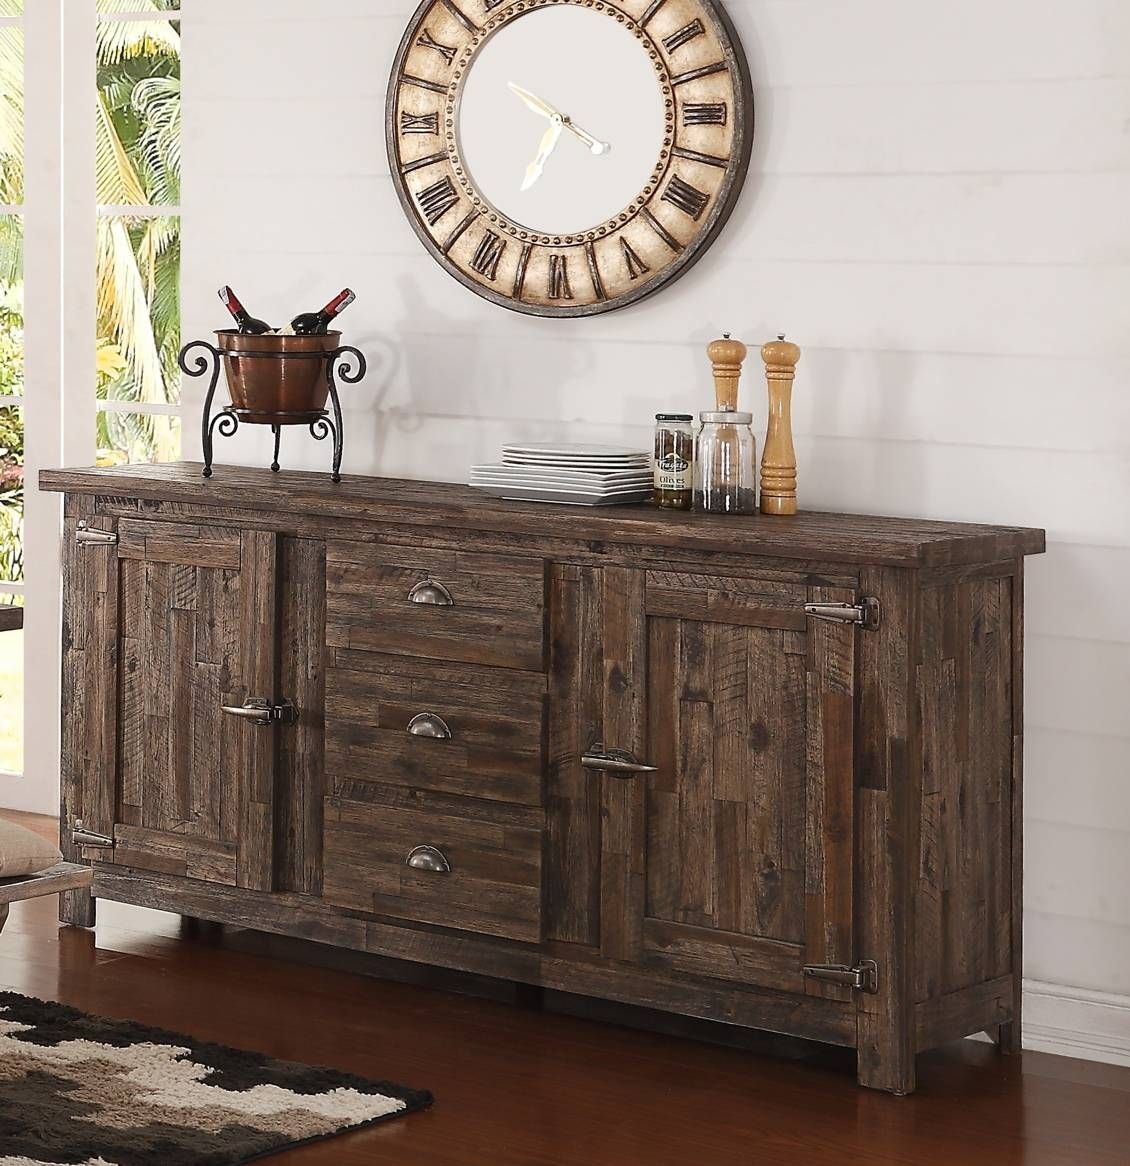 Tuscany Park – New Classic Furniture Regarding Tuscany Sideboard (View 14 of 20)